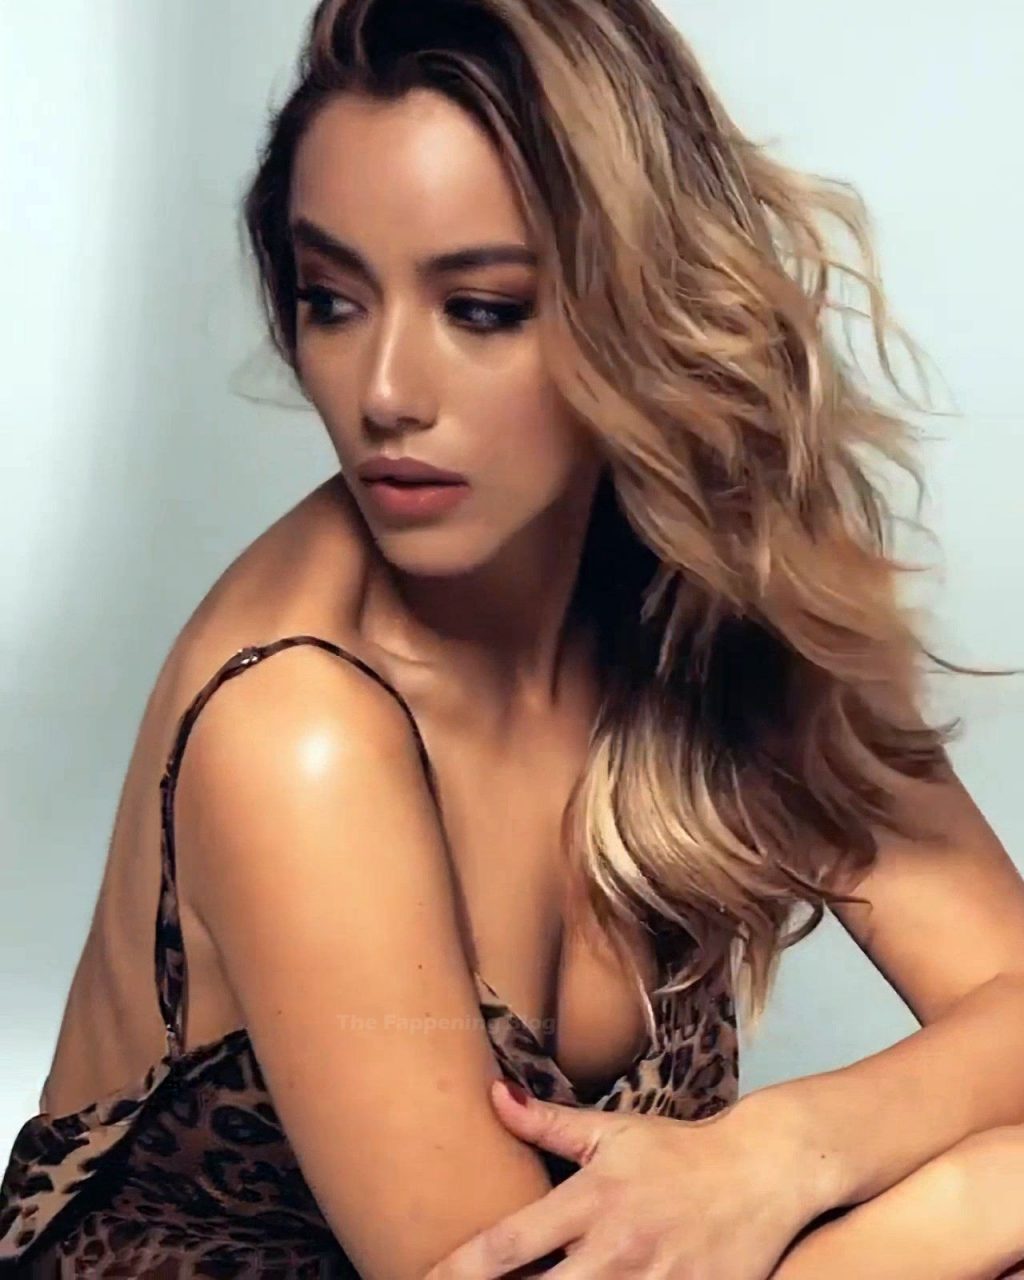 Chloe Bennet Shows Off Her Nude Breasts (12 Pics + Video)